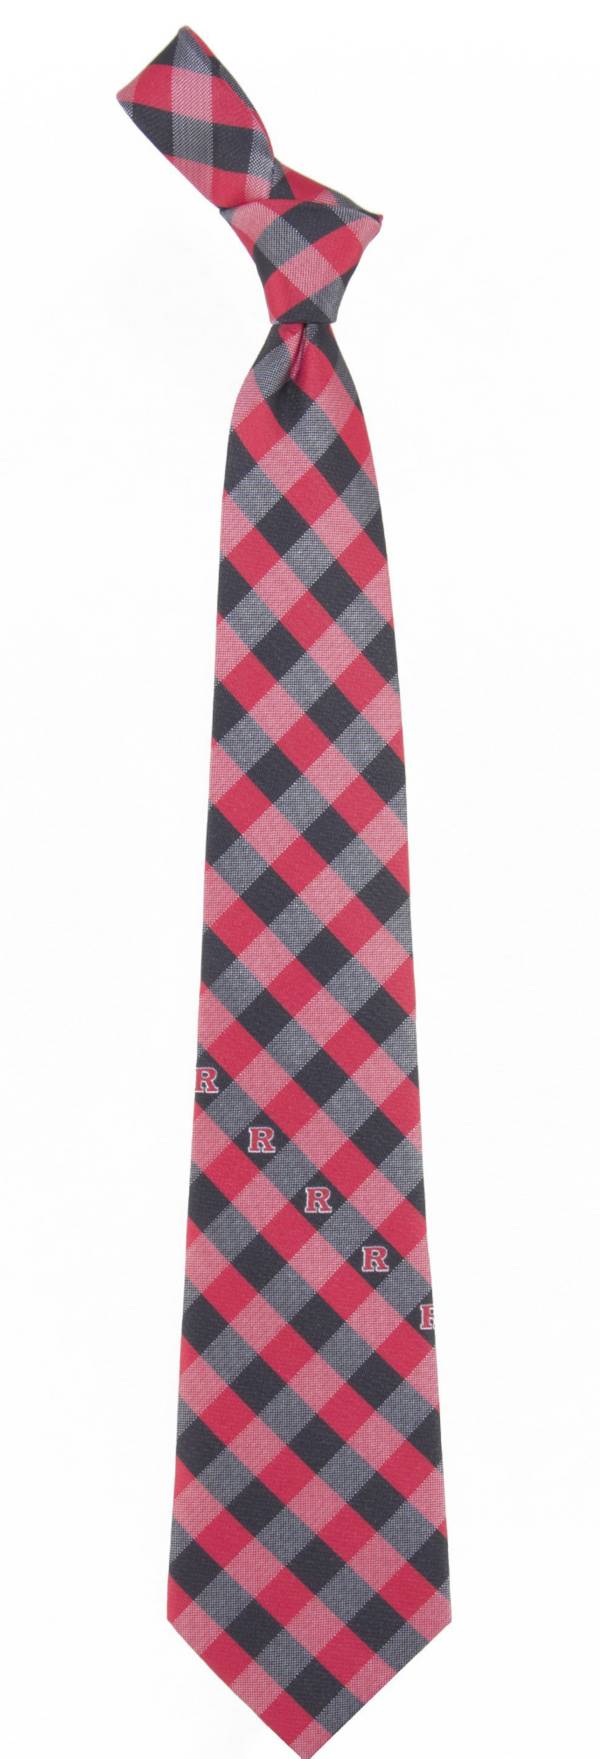 Eagles Wings Rutgers Scarlet Knights Check Necktie product image